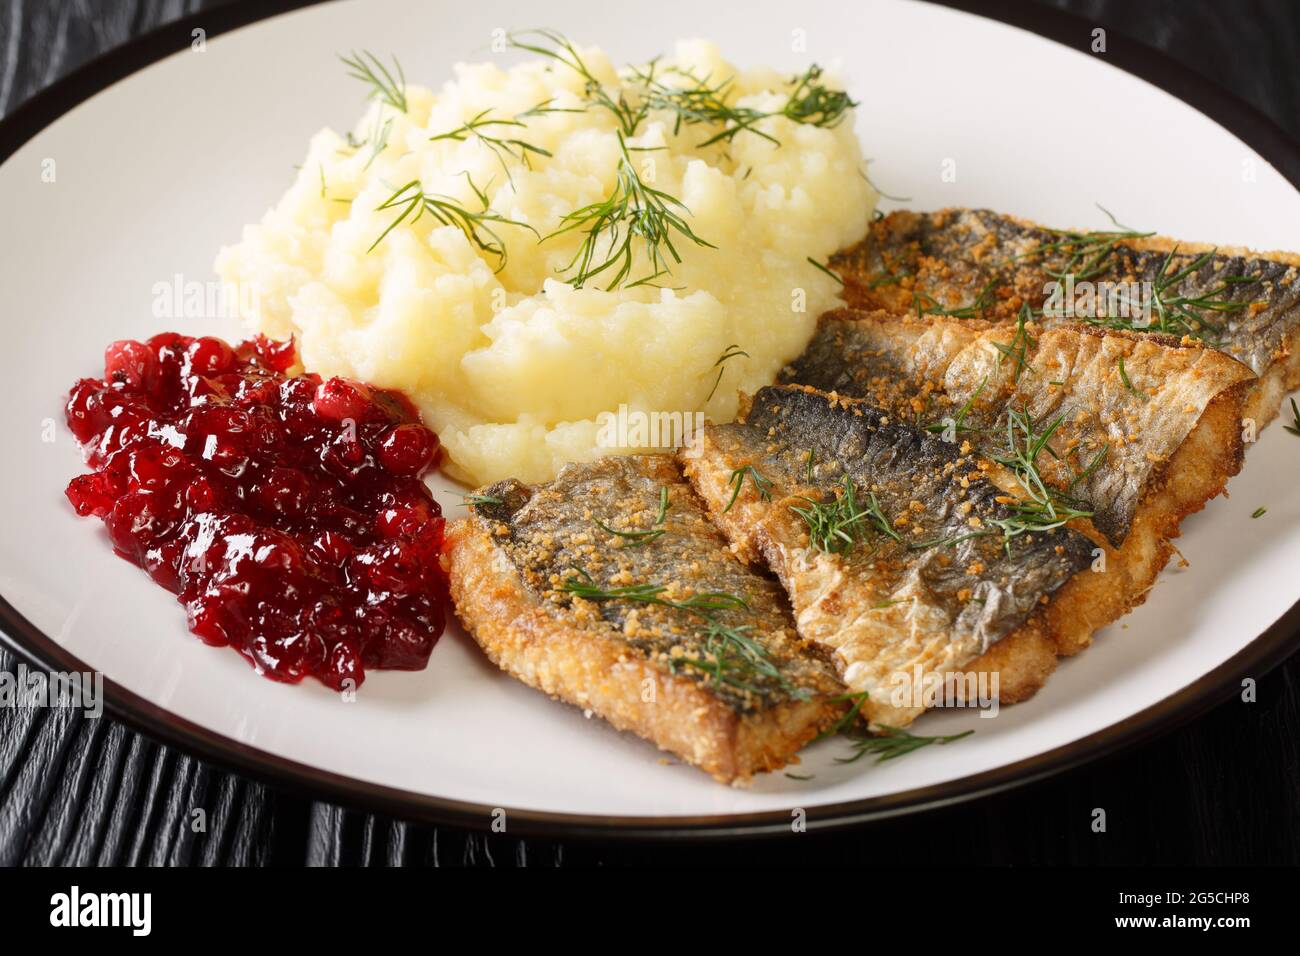 Fried herring fillets with mashed potatoes and lingonberry sauce close-up in a plate on the table. horizontal Stock Photo